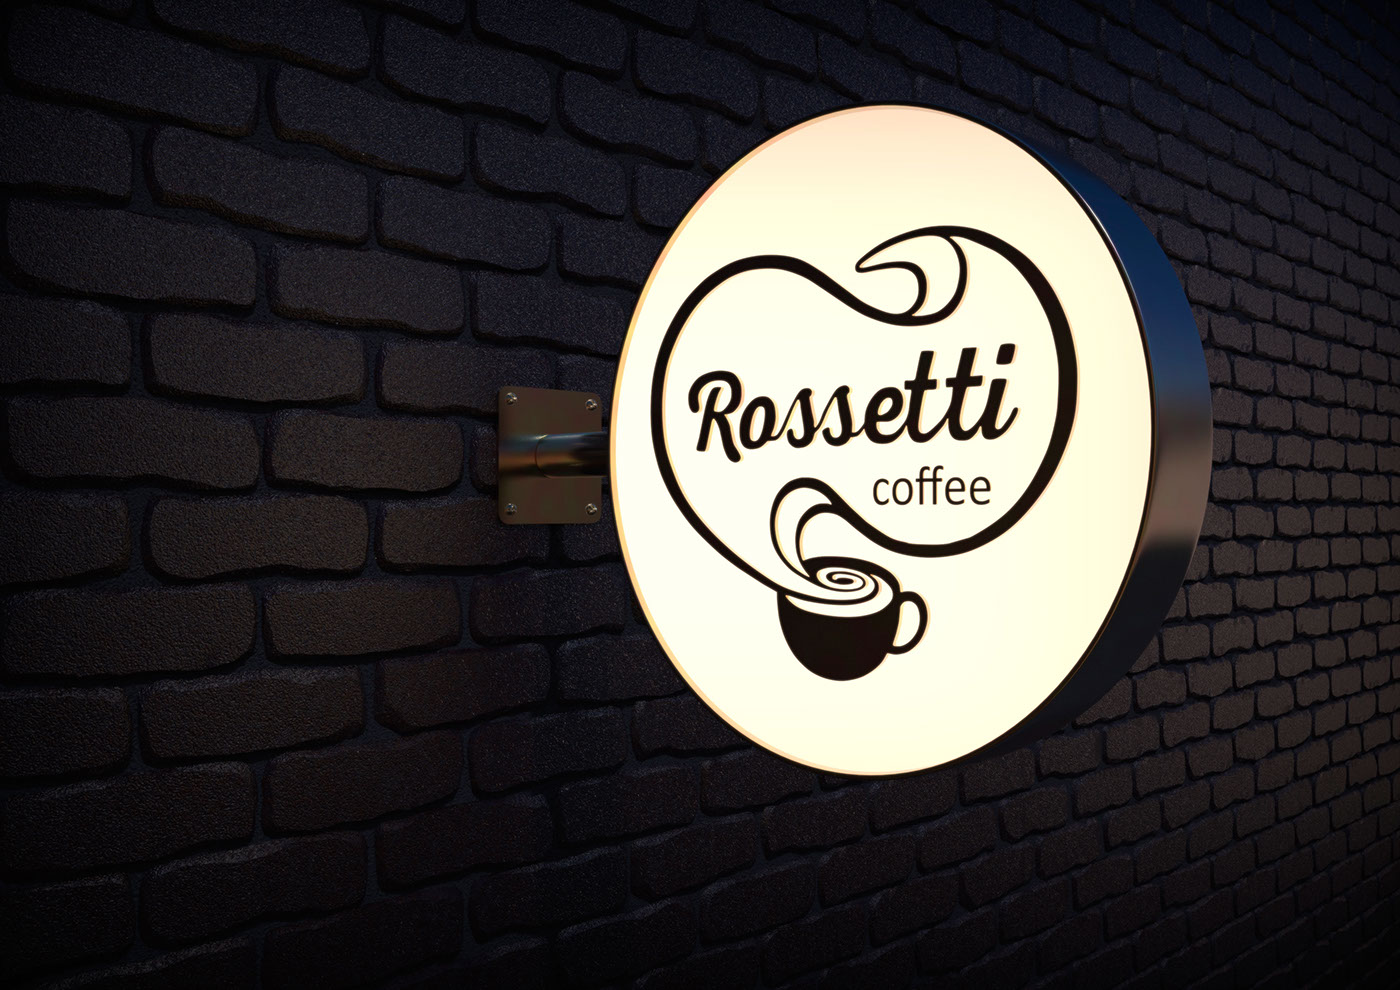 Coffee brand package packing cup rossetticoffee rossetti